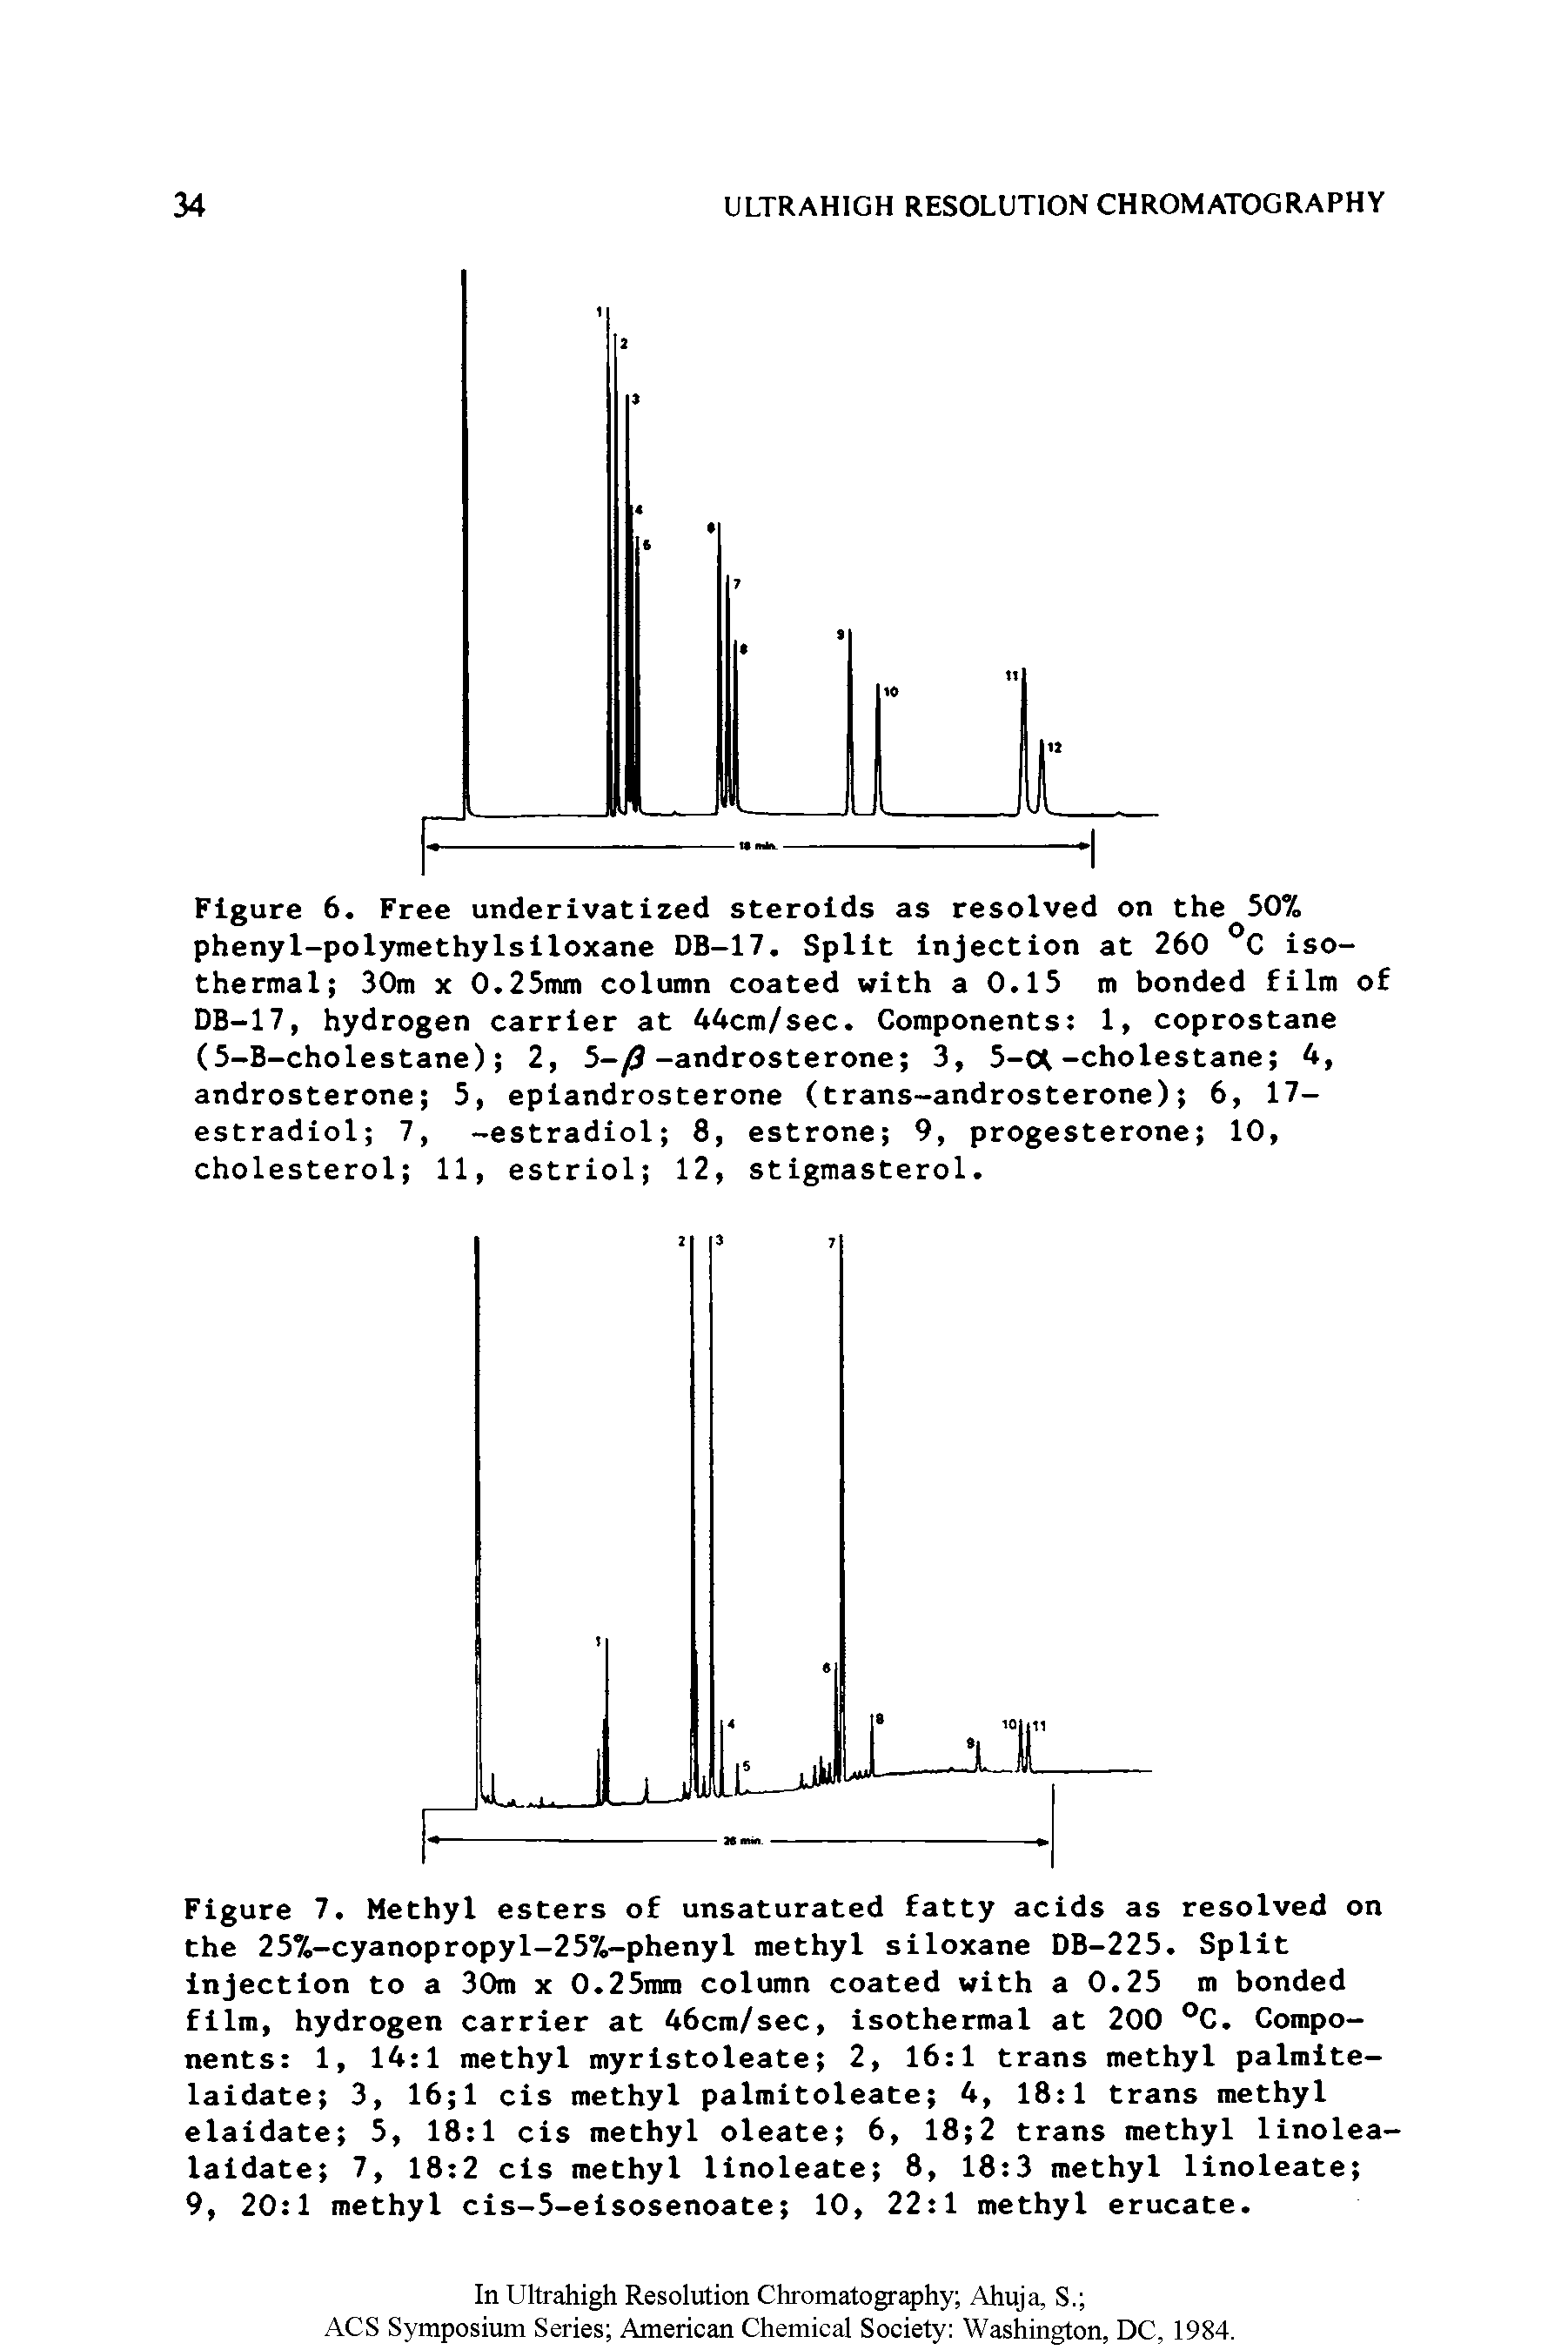 Figure 7. Methyl esters of unsaturated fatty acids as resolved on the 25%-cyanopropyl-25%-phenyl methyl siloxane DB-225. Split Injection to a 30m x 0.25mm column coated with a 0.25 m bonded film, hydrogen carrier at 46cm/sec, isothermal at 200 °C. Components 1, 14 1 methyl myristoleate 2, 16 1 trans methyl palmite-laidate 3, 16 1 cis methyl palmitoleate 4, 18 1 trans methyl elaidate 5, 18 1 cis methyl oleate 6, 18 2 trans methyl linolea-laidate 7, 18 2 cis methyl linoleate 8, 18 3 methyl linoleate ...